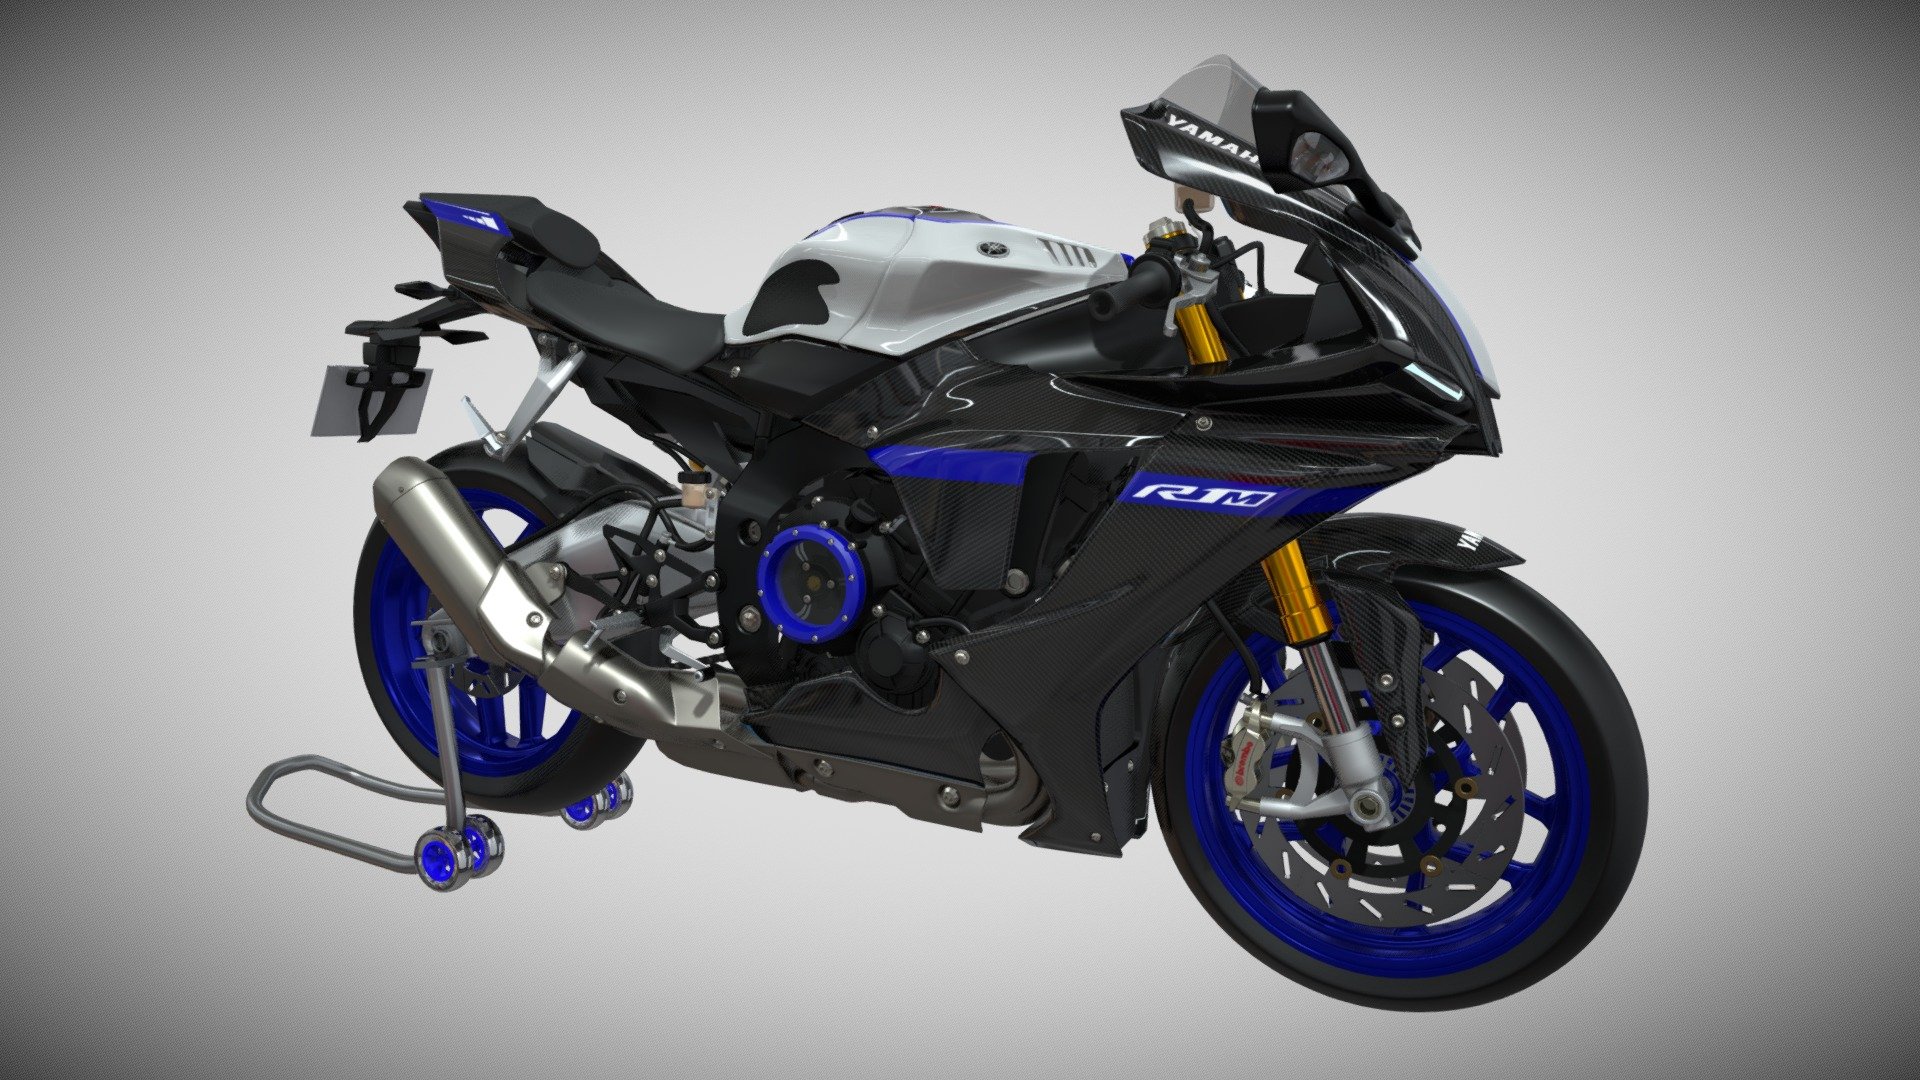 The 2021 Model of Yamaha R1M.
Colour : Performance Black
if you want to download it, contact me in : fajaralhayda99@gmail.com - Yamaha R1 R1M - 3D model by ALHAYDA 3d model